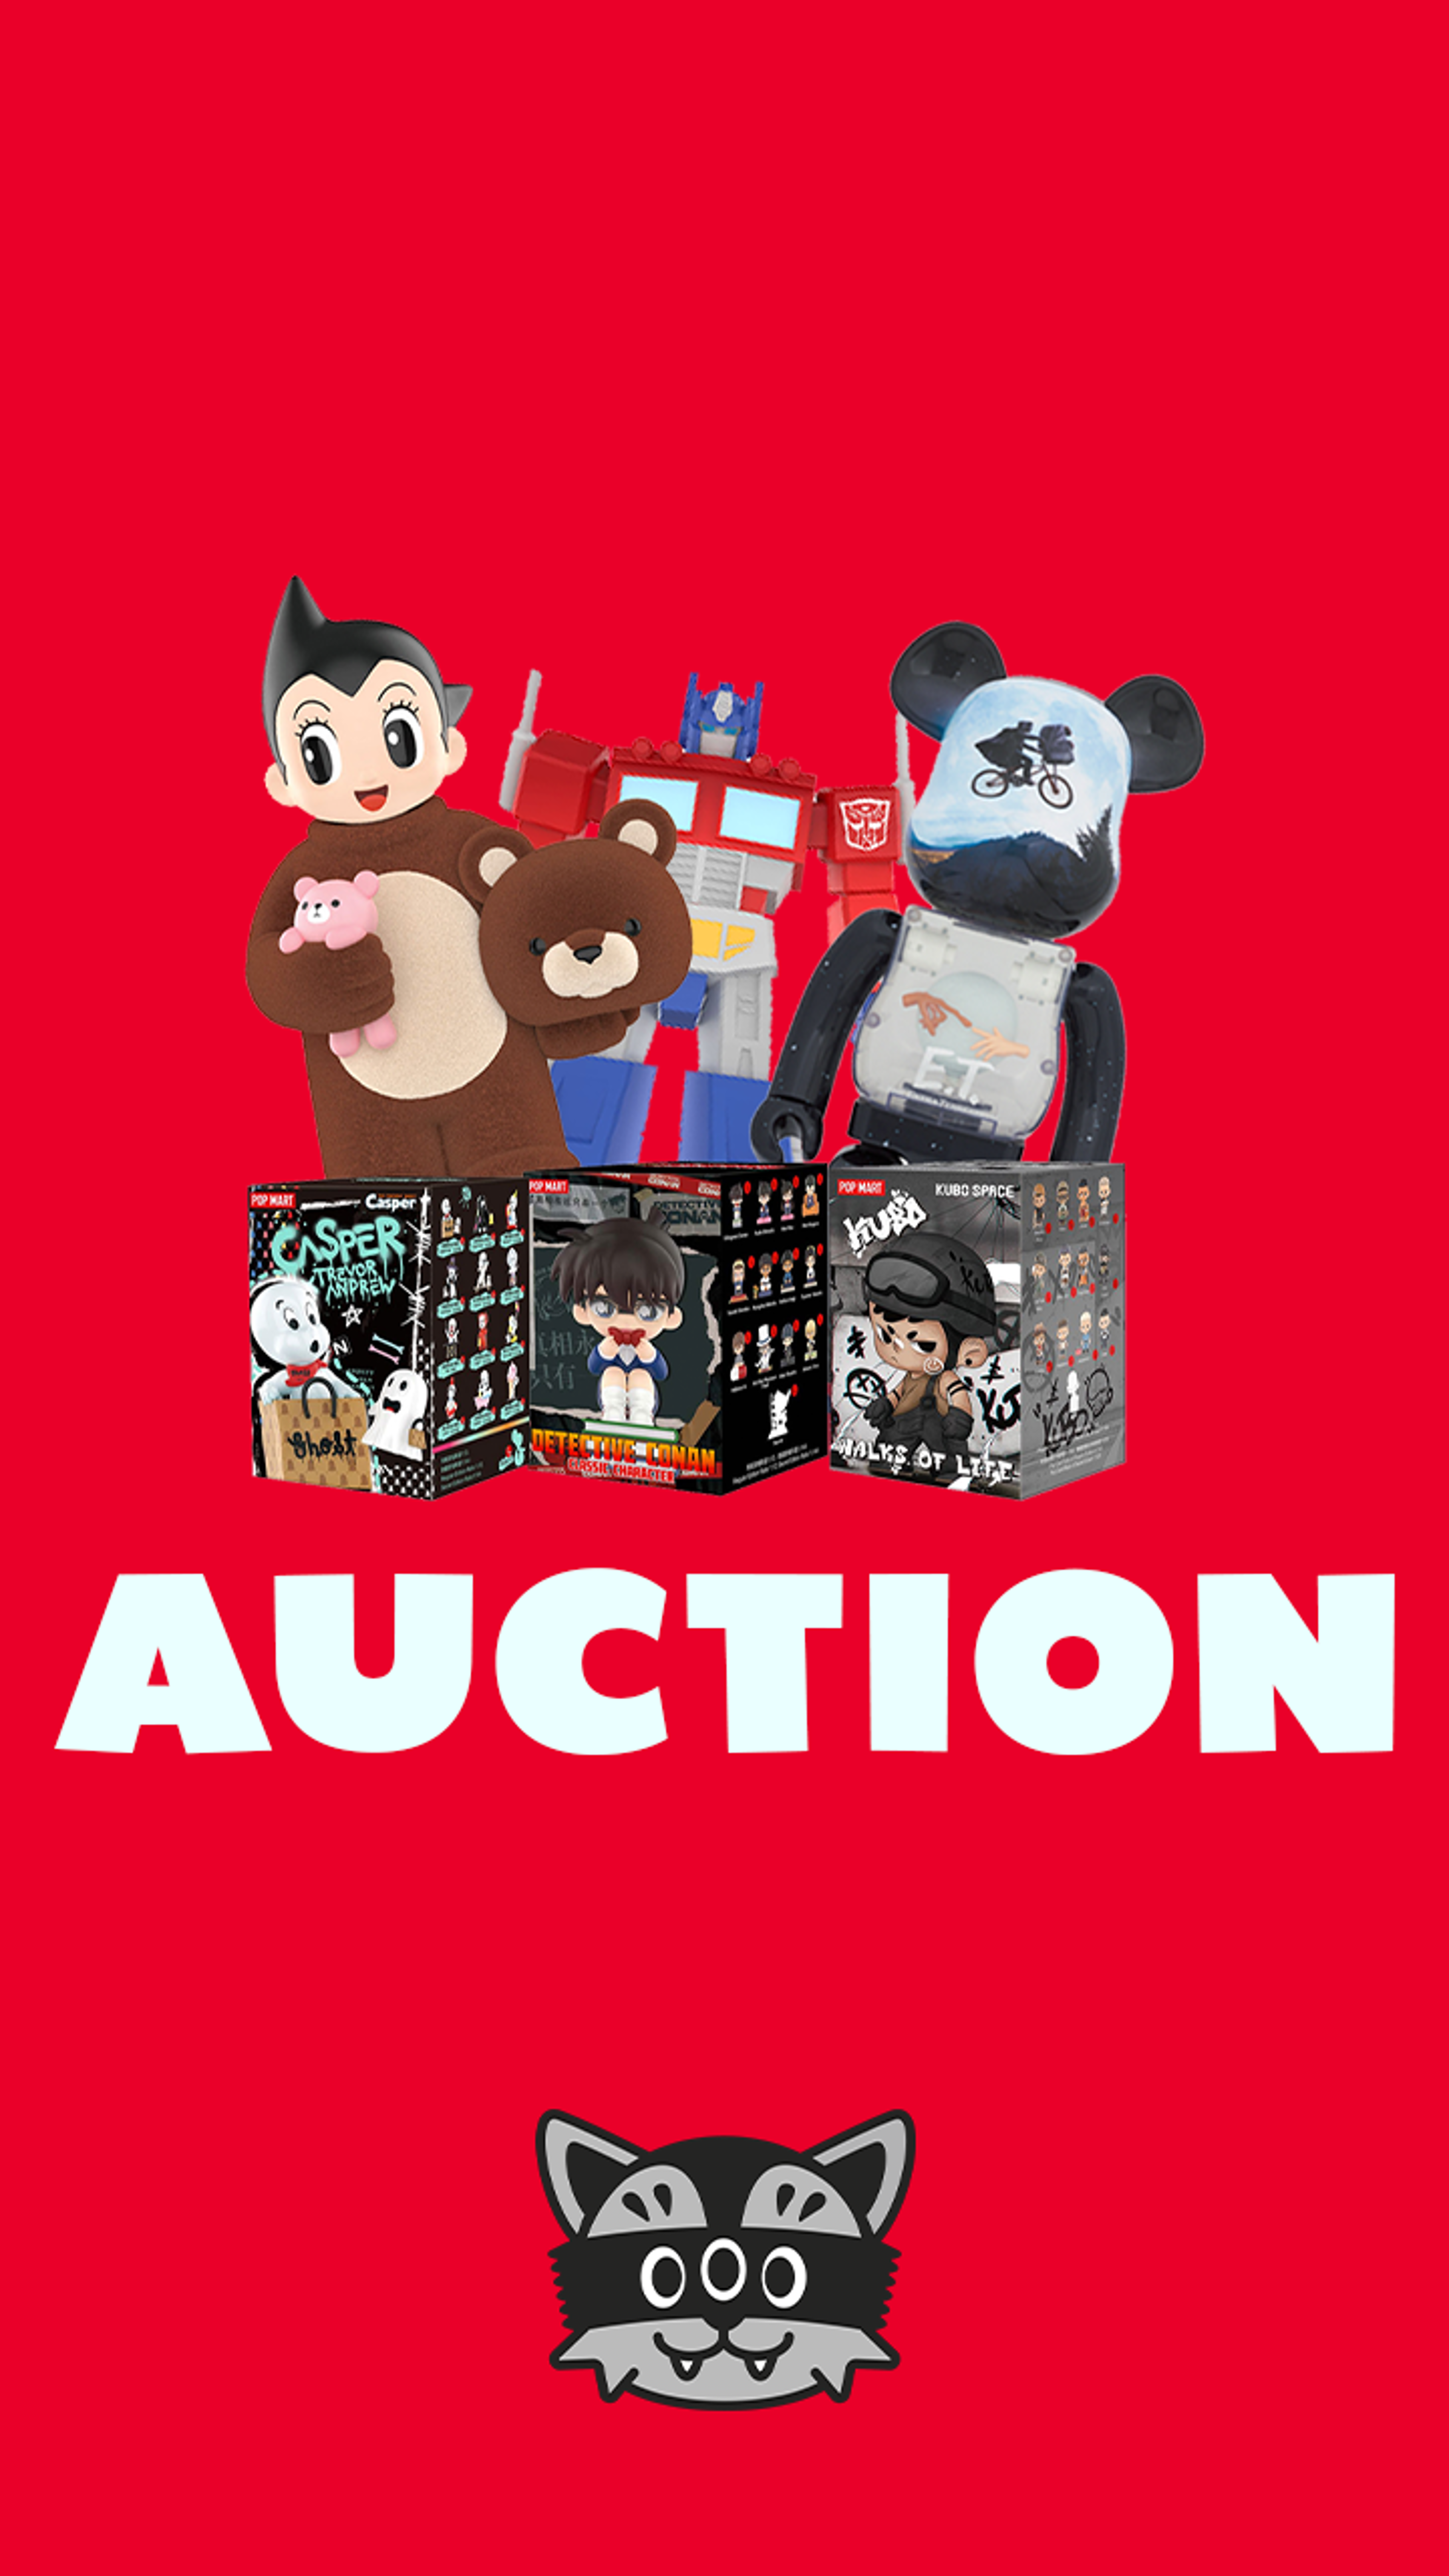 Preview image for the show titled "Mindzai Auction - March 29" at Today @ 5:00 PM